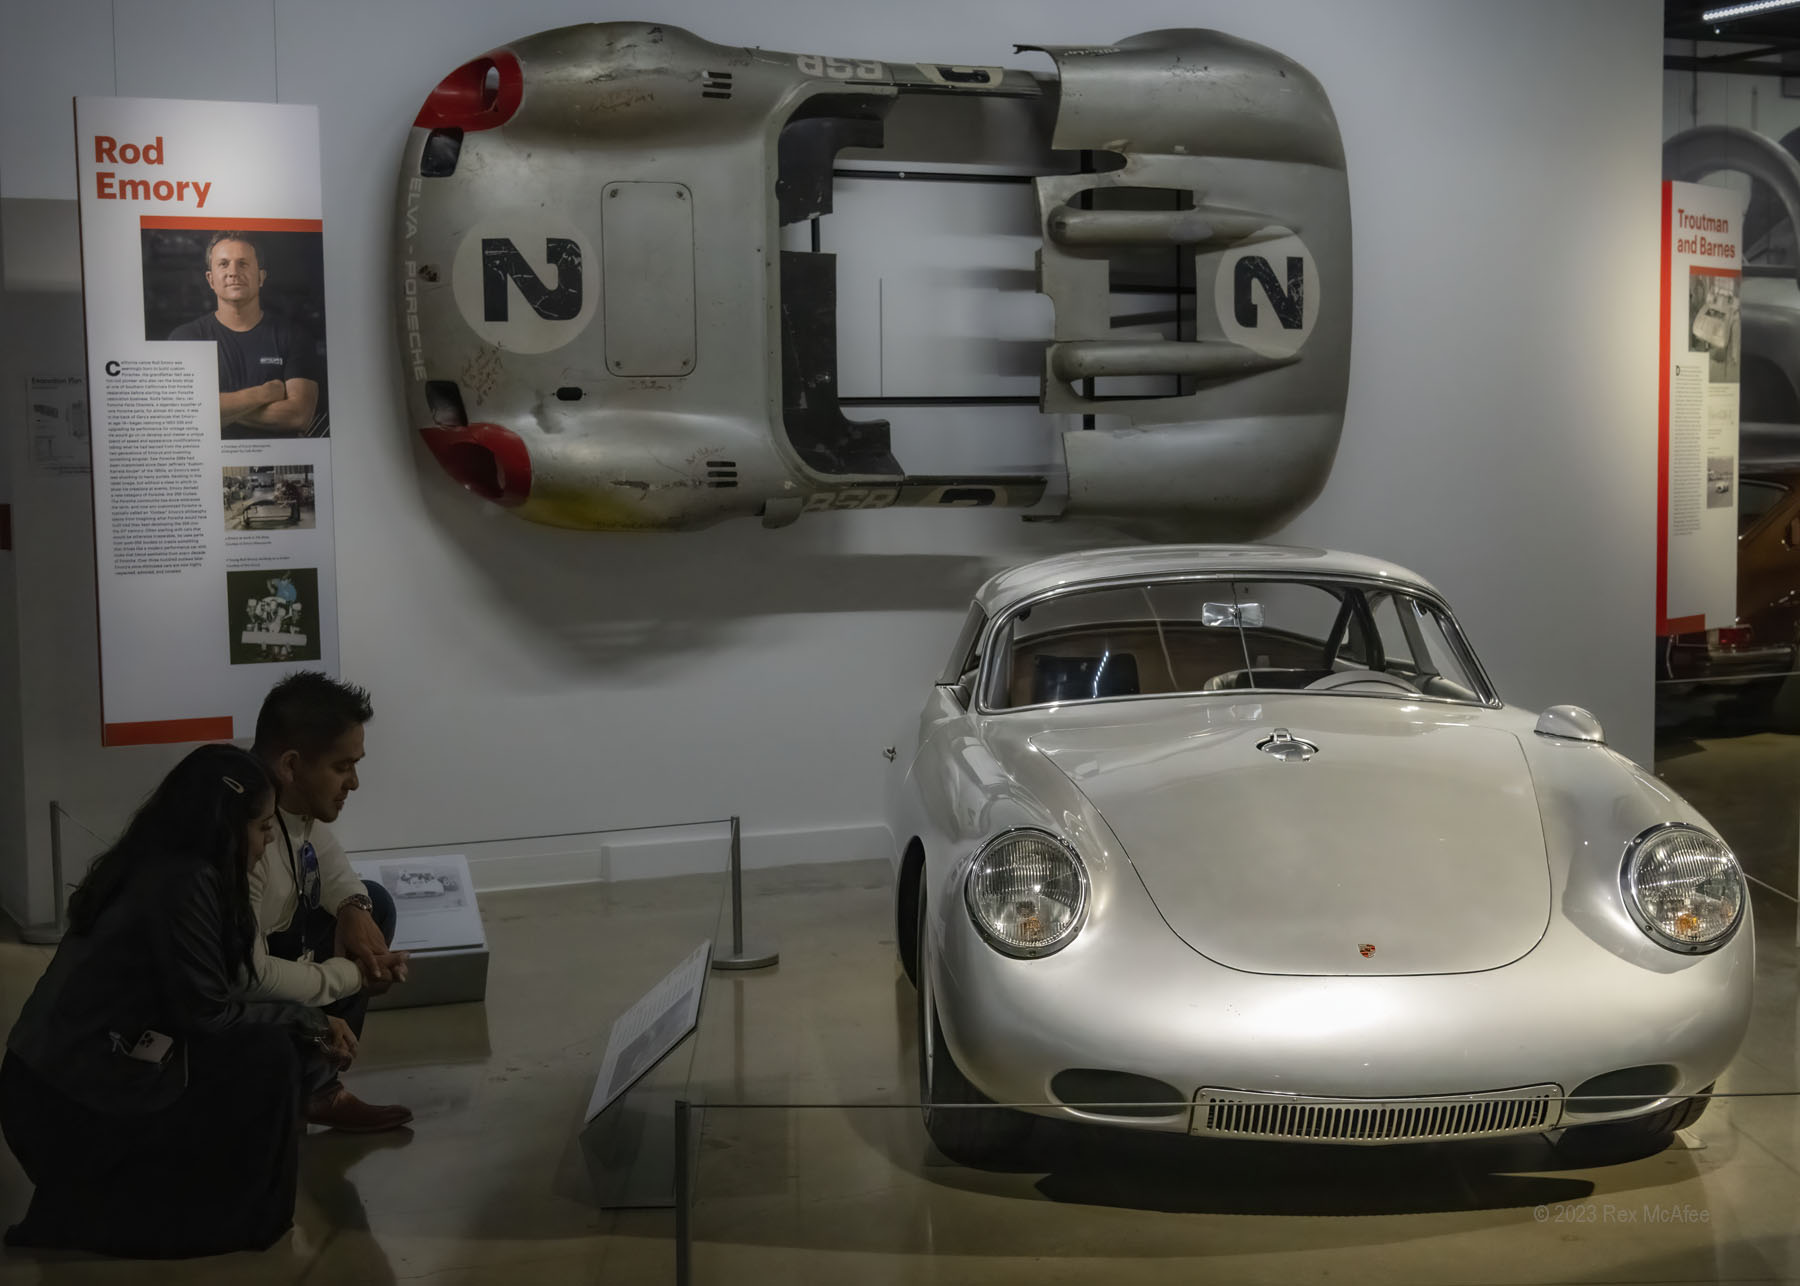 At age 14, Rod Emory began restoring a 1953 Porsche 356 and upgrading its performance for vintage racing. Years later for the 50th anniversary of Porsche in 1998, Rod built this “Emory Special” using a 1964 Porsche 356C as the starting point. Photo © 2023 Rex McAfee RexMcAfee@gmail.com